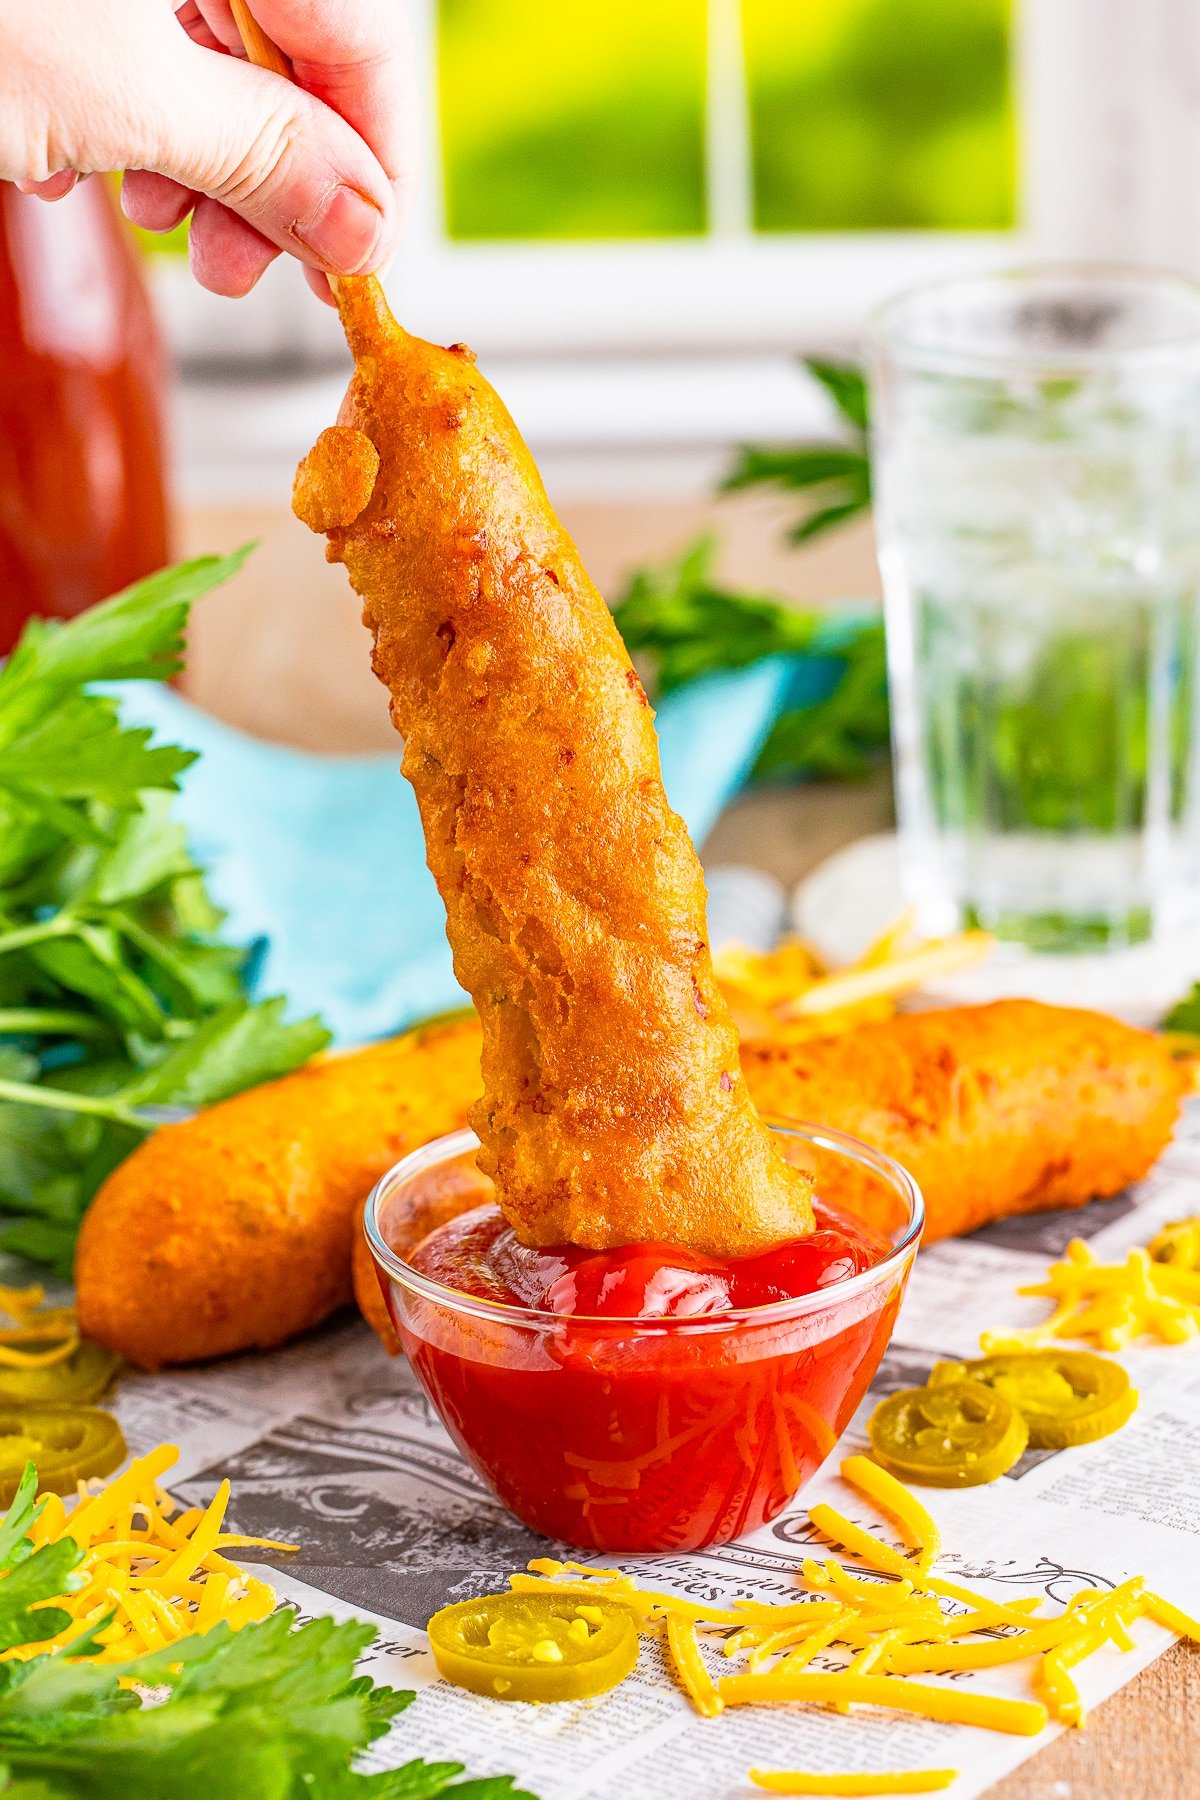 dipping corn dogs recipe into ketchup